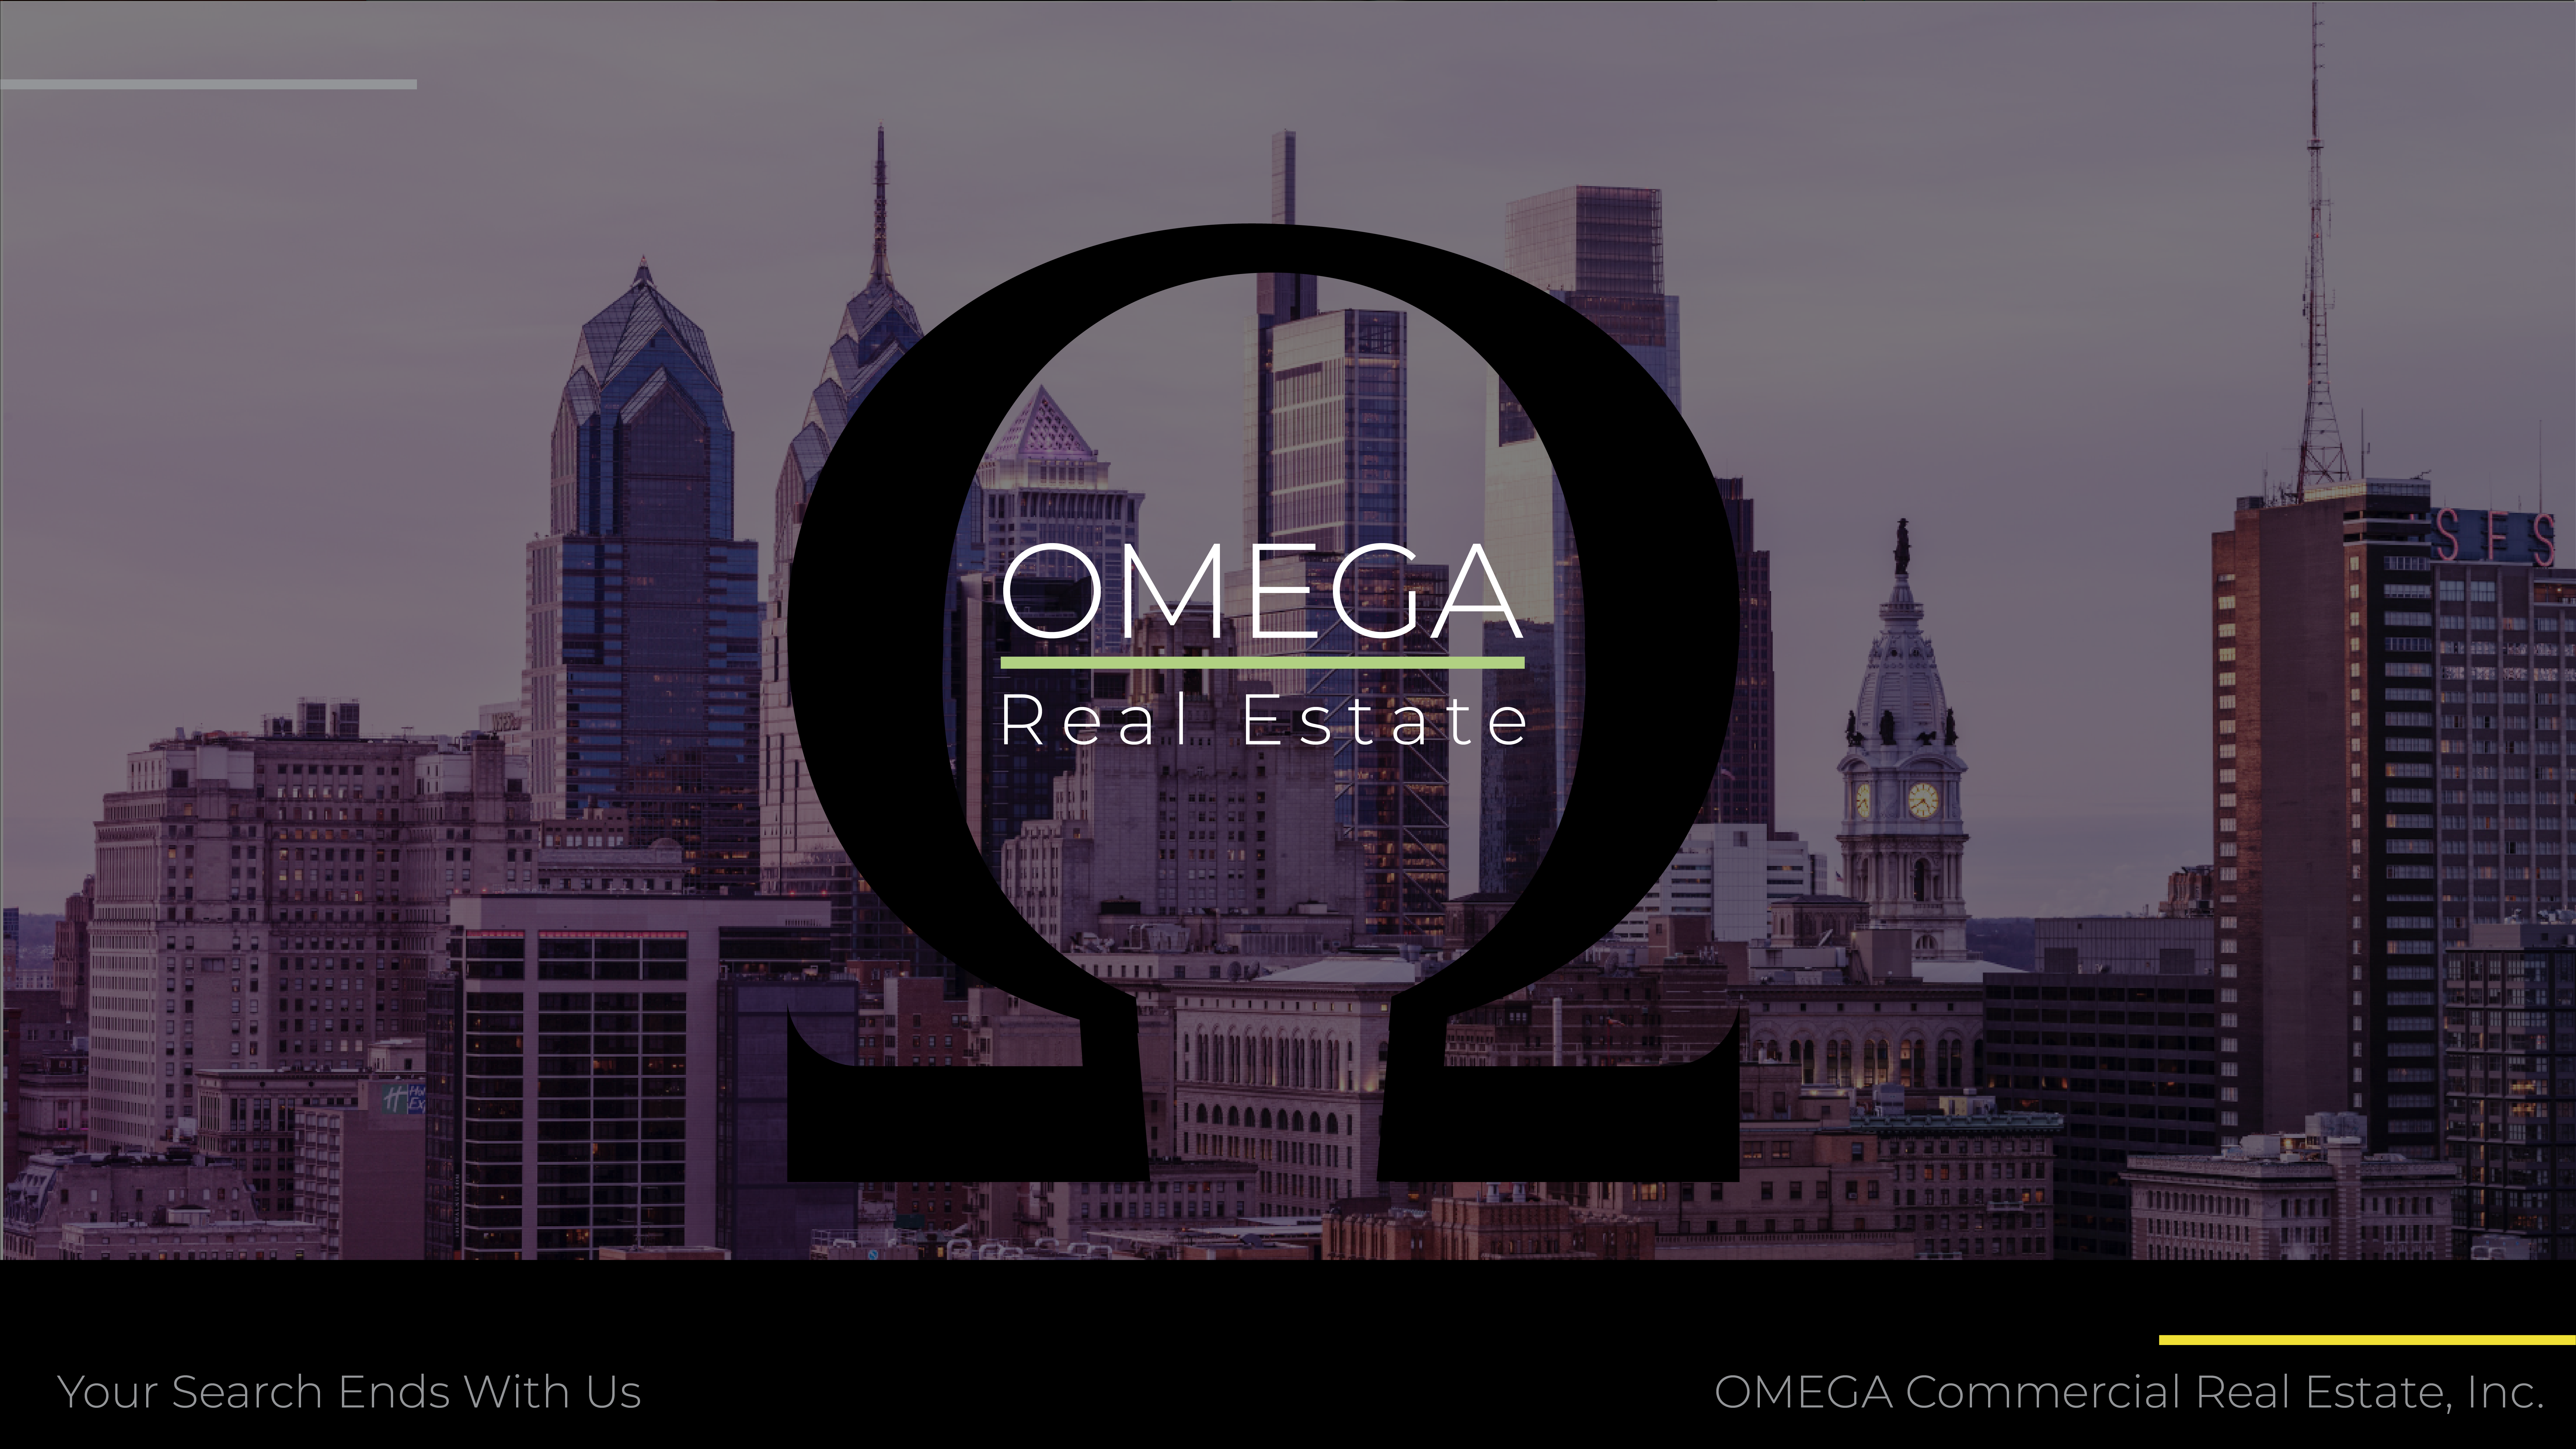 Medical Real Estate, Retail Real Estate and Hospitality Real Estate Picture For OMEGA Commercial Real Estate Serving Montgomery County, Chester County, Delaware County, Lehigh County, Berks County, Philadelphia, King of Prussia, Conshohocken, Phoenixville, Norristown, and more in Pennsylvania.